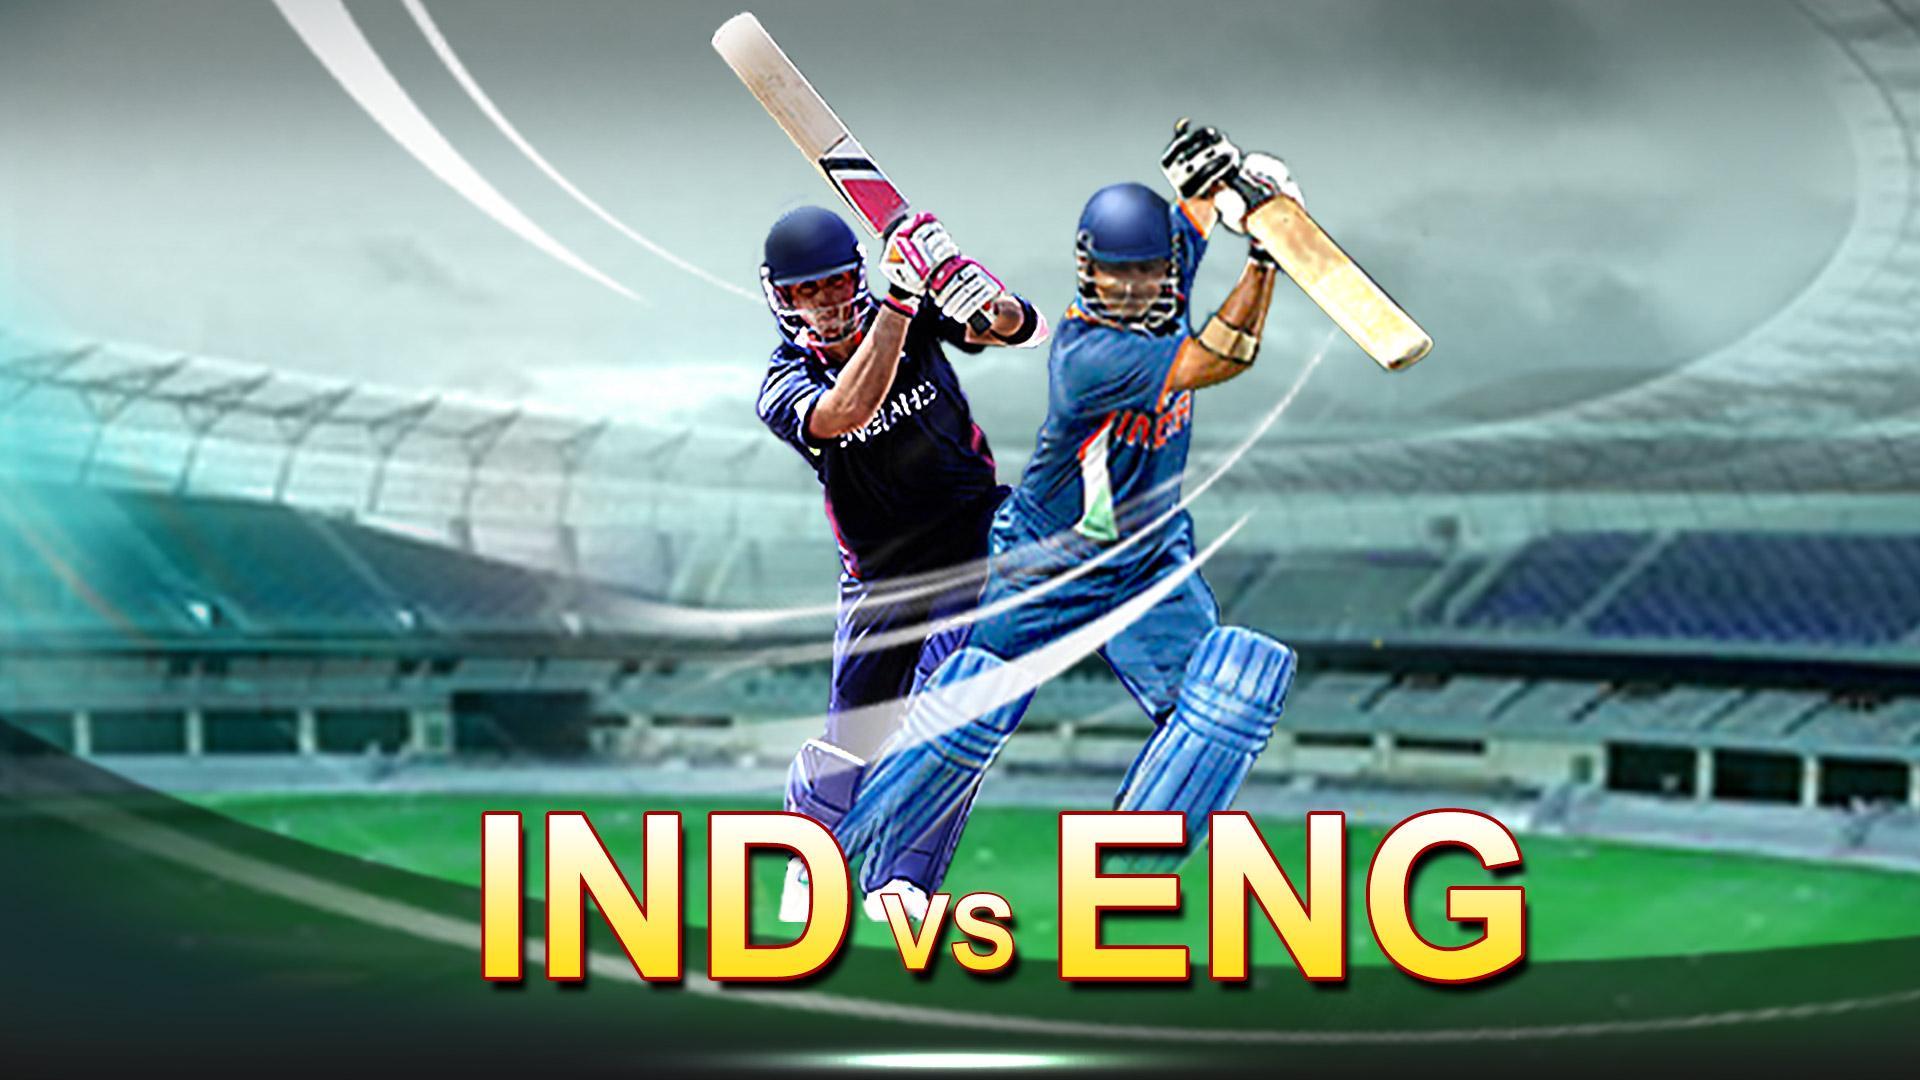 Ind Vs Eng for Android - APK Download